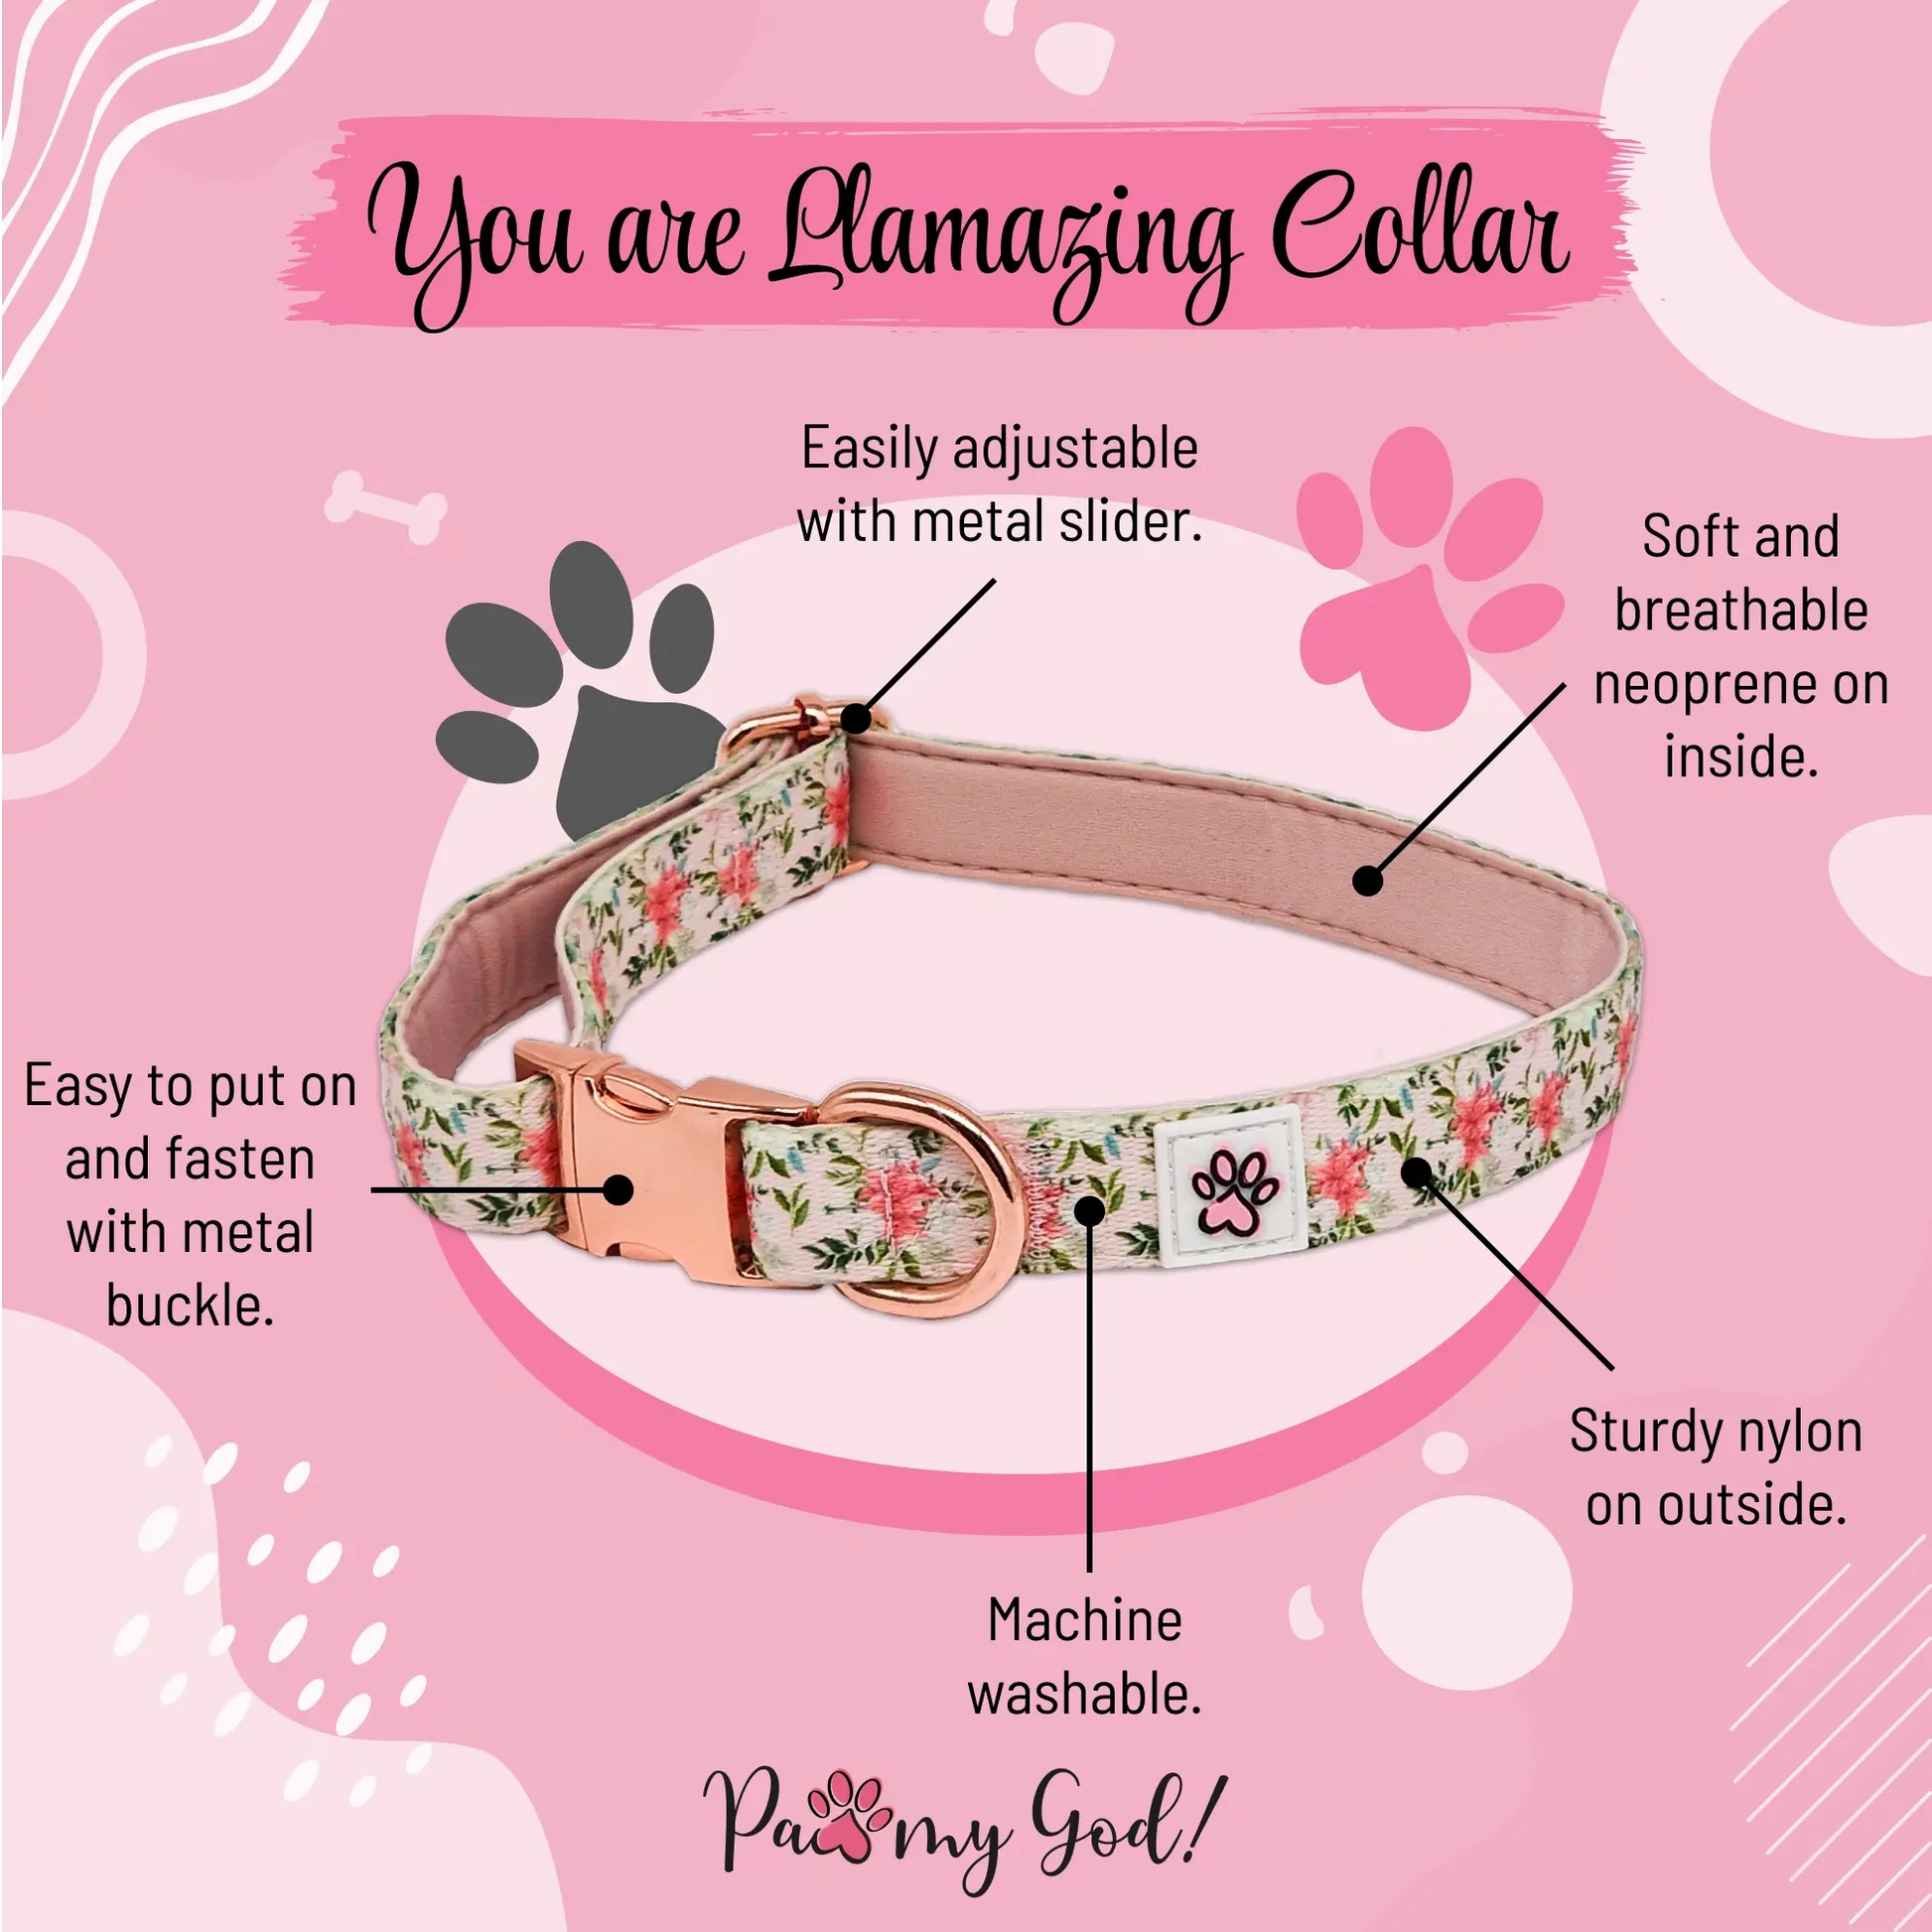 You are Llamazing Cloth Collar Features